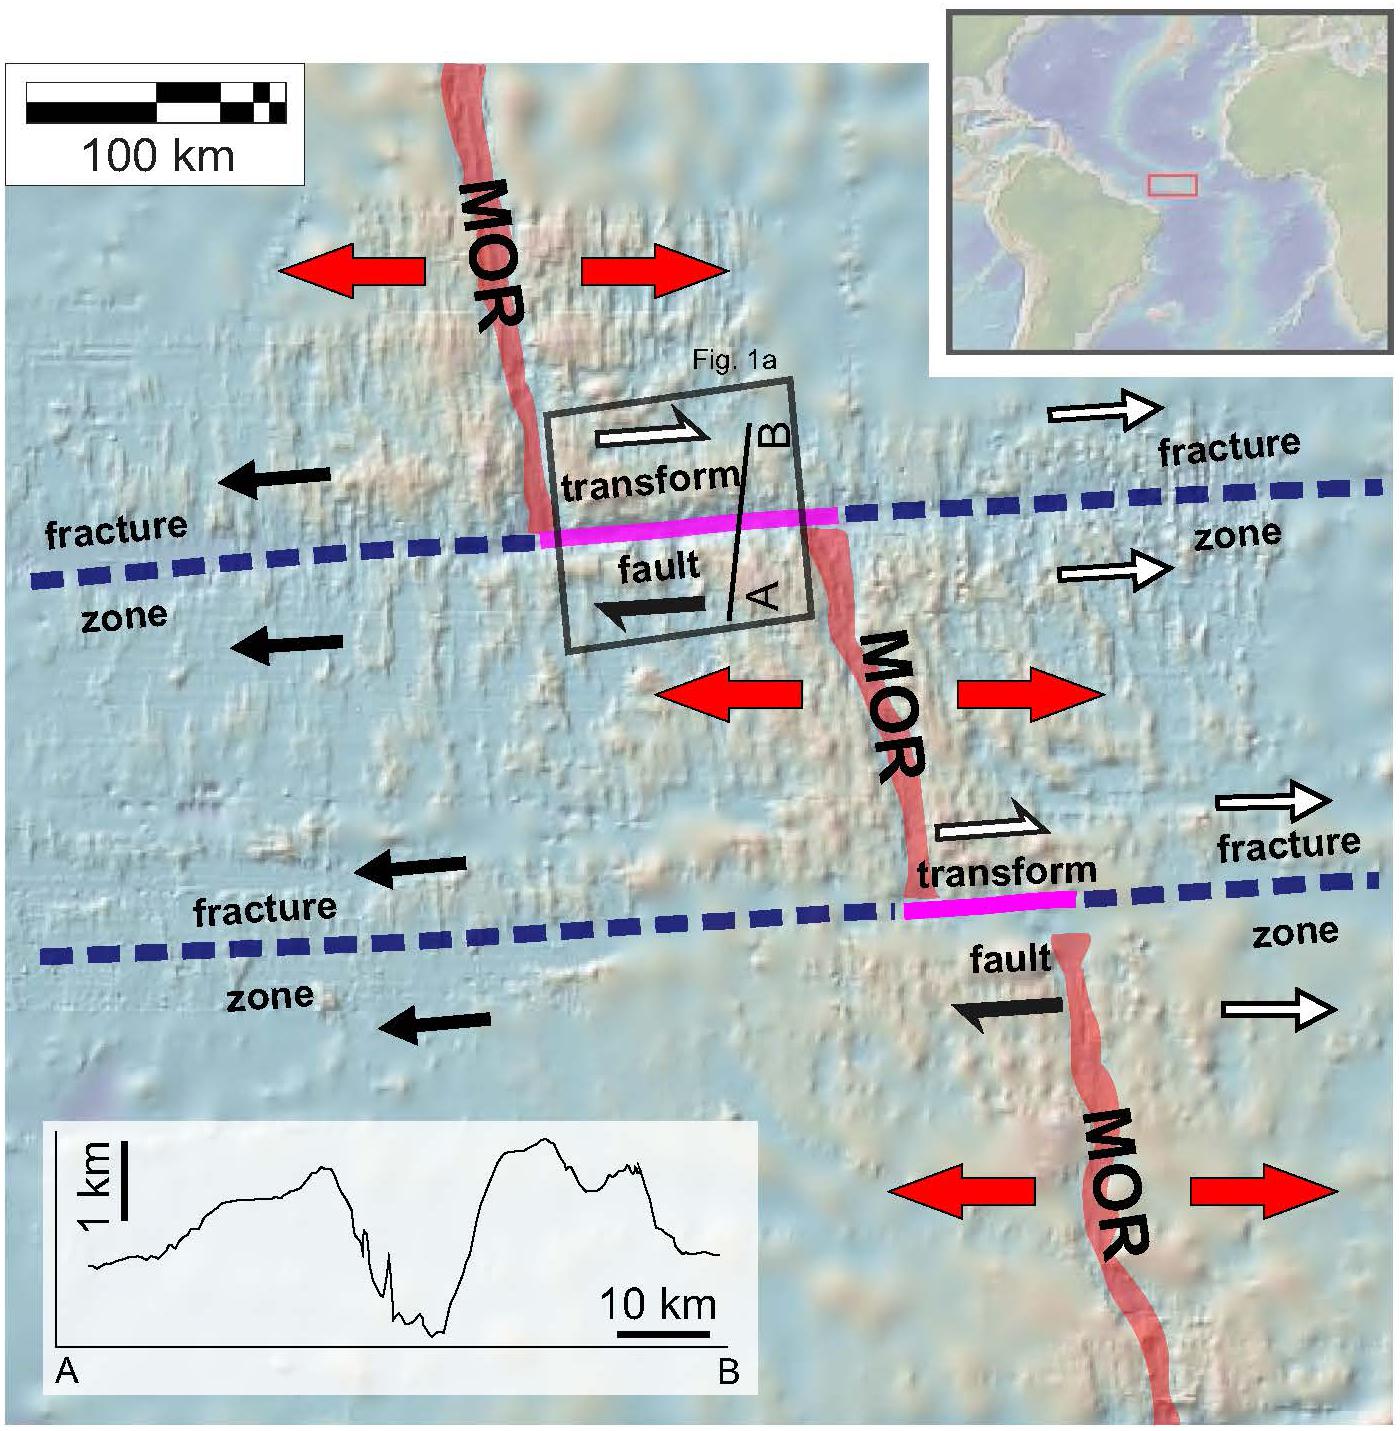 Frontiers Marine Transform Faults And Fracture Zones A Joint Perspective Integrating Seismicity Fluid Flow And Life Earth Science